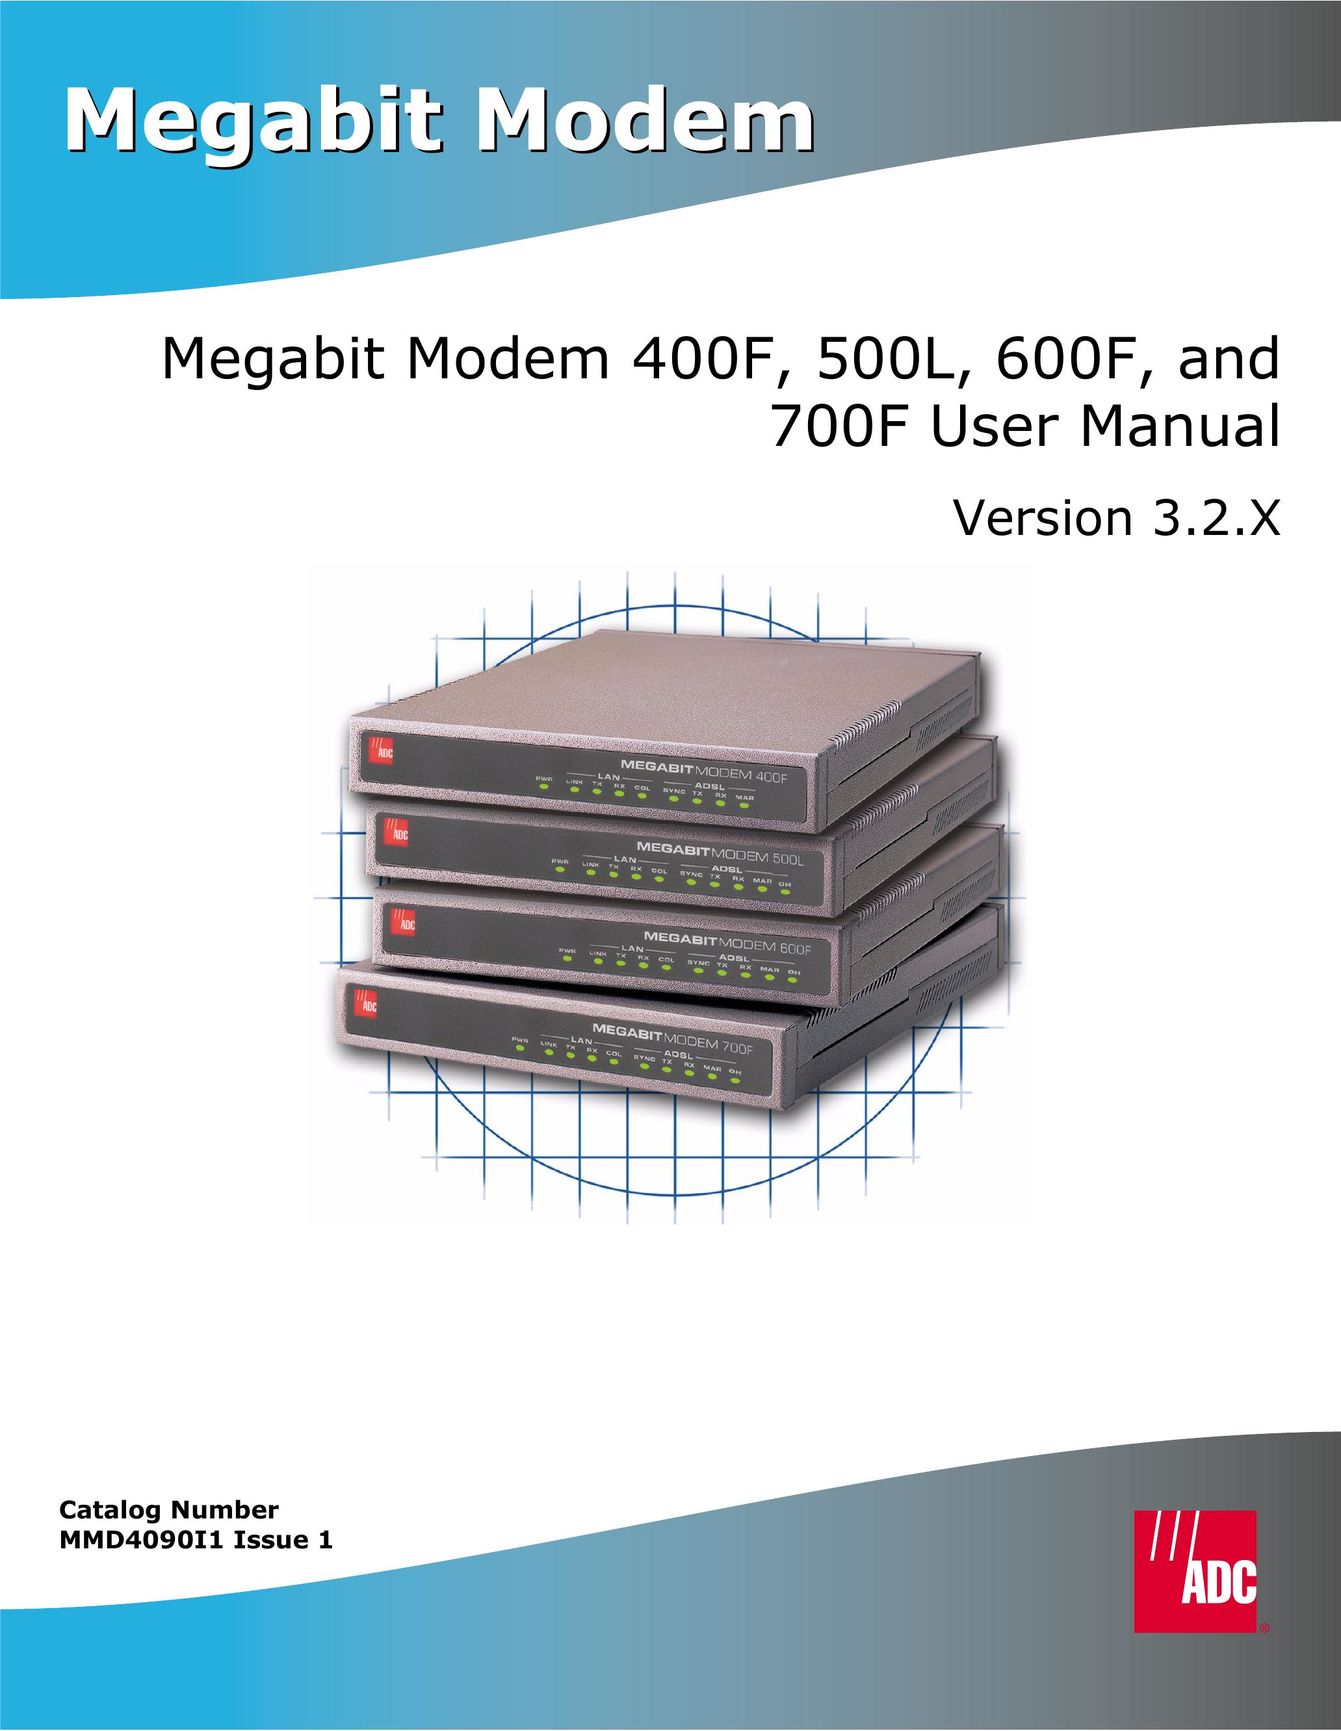 ADC 700F Network Card User Manual